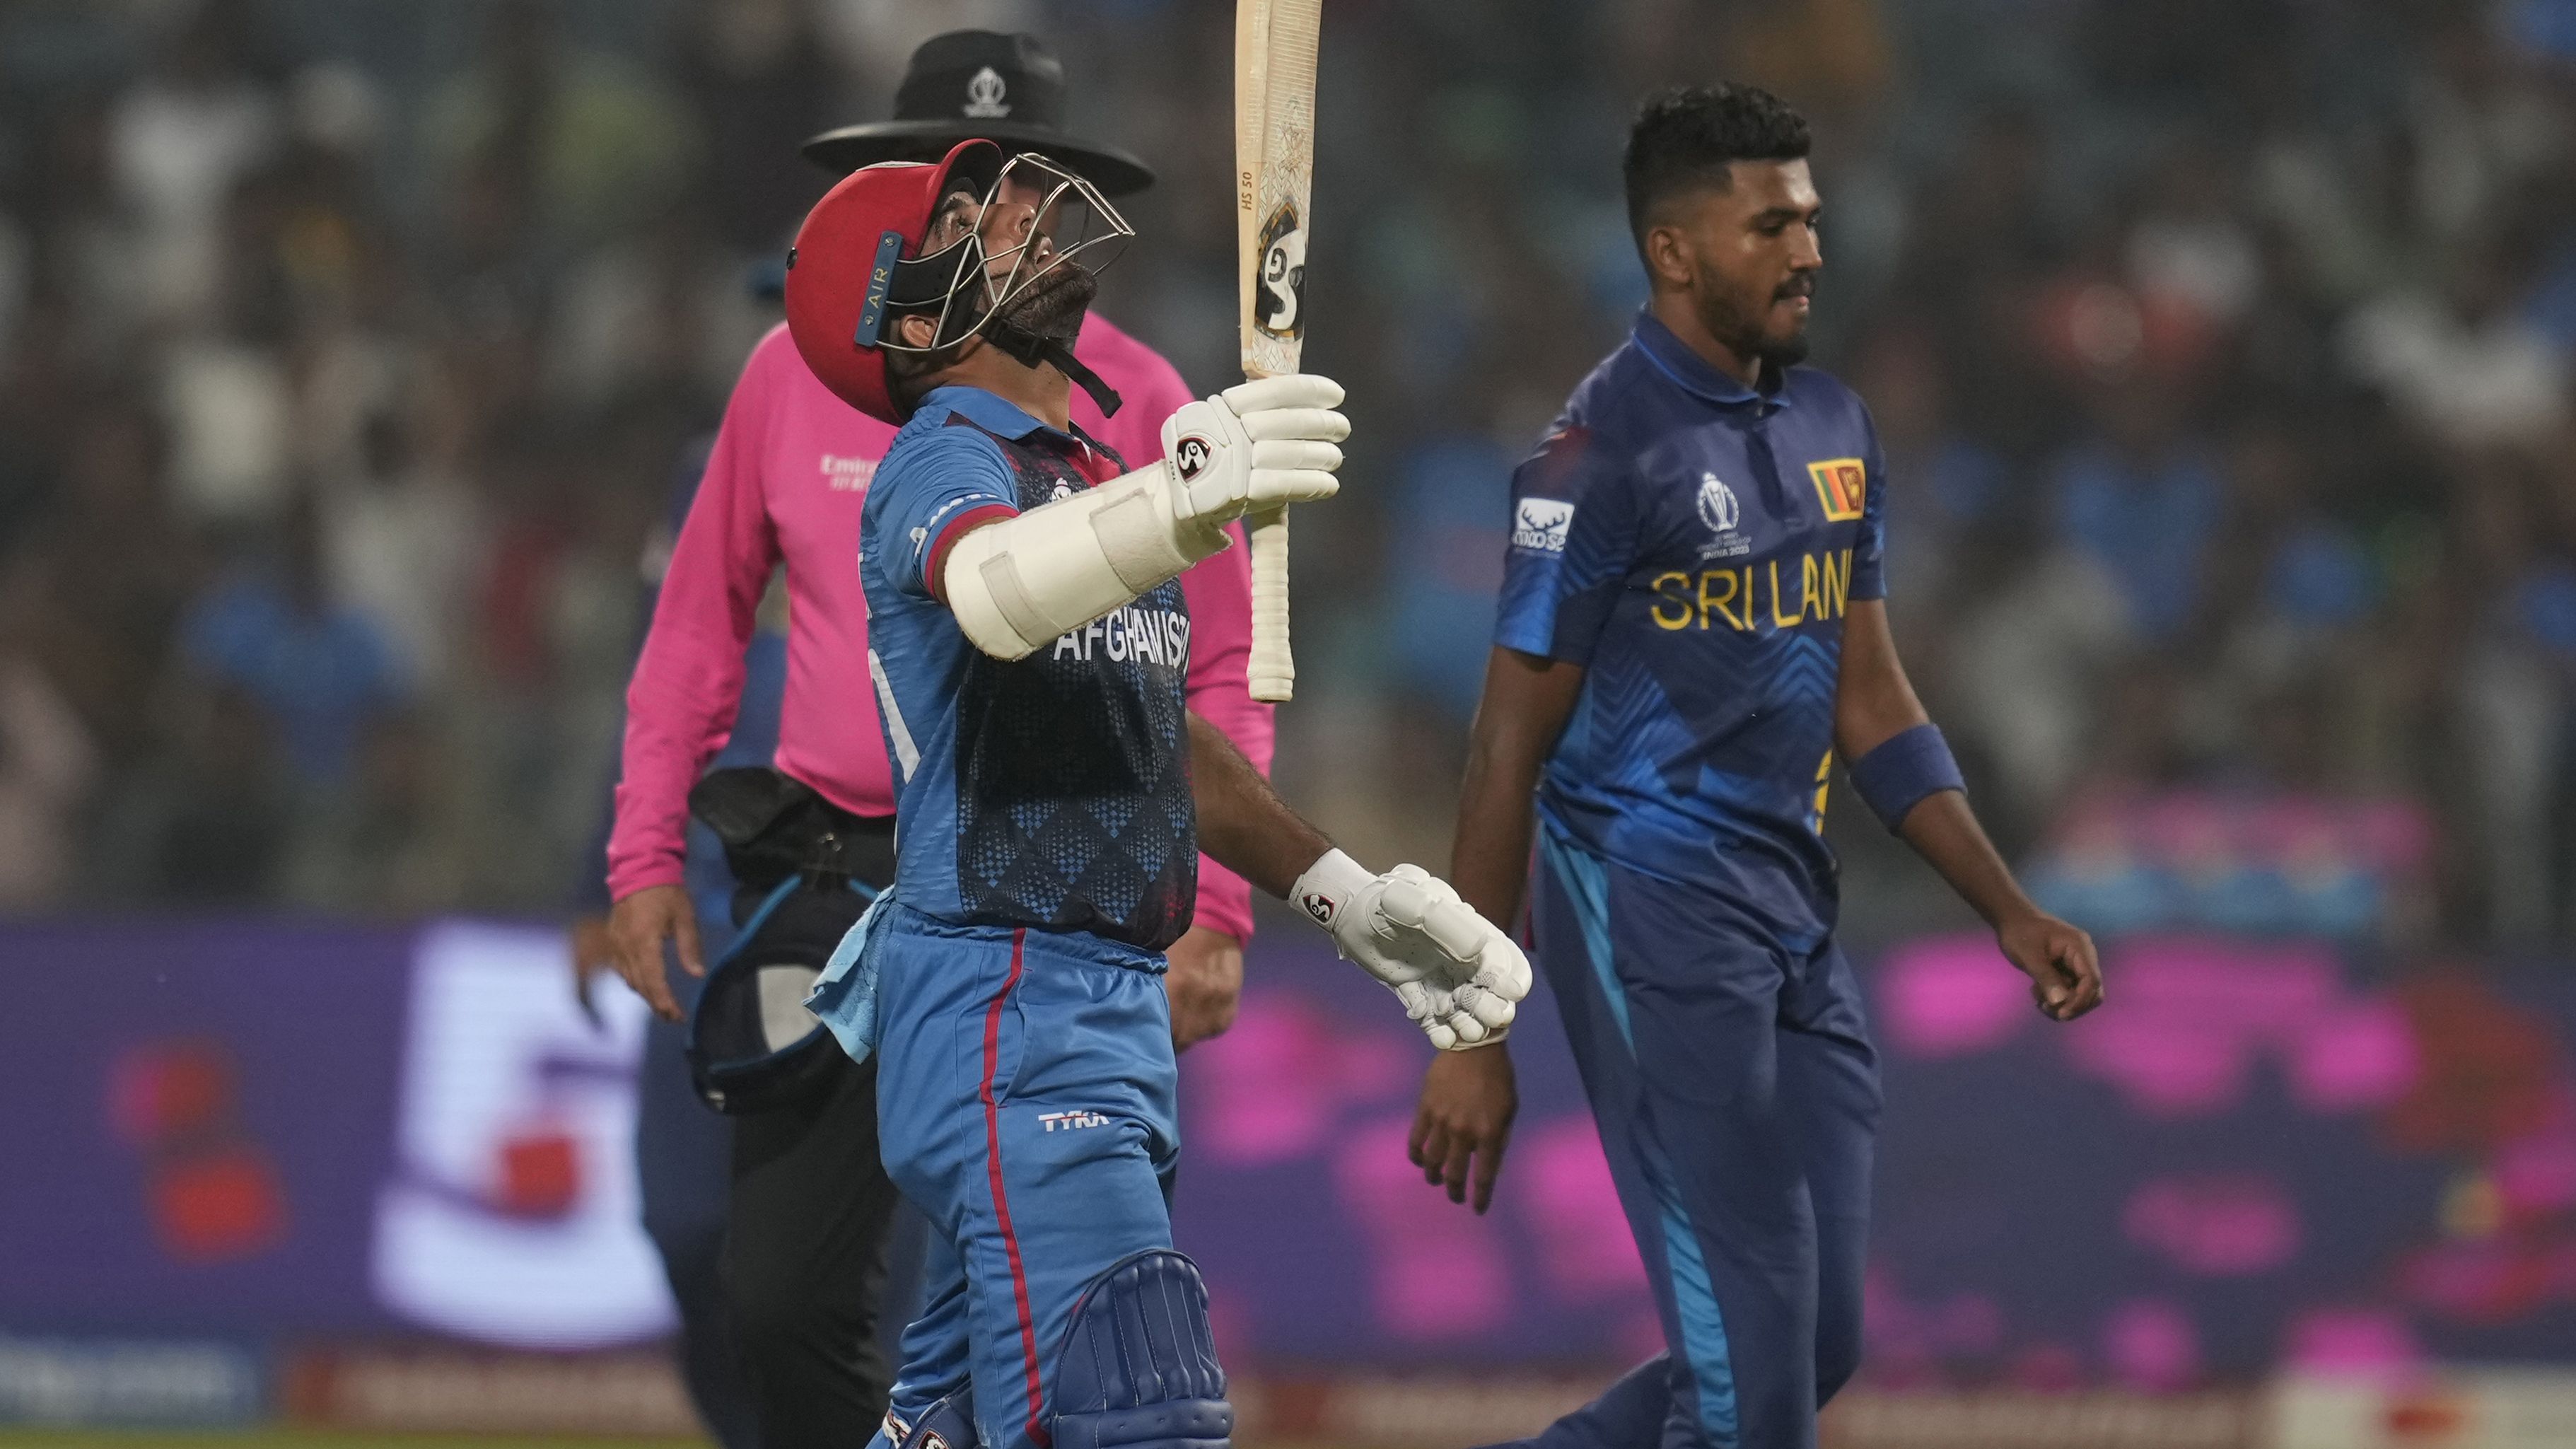 Afghanistan fairytale continues with World Cup win over former champs Sri Lanka